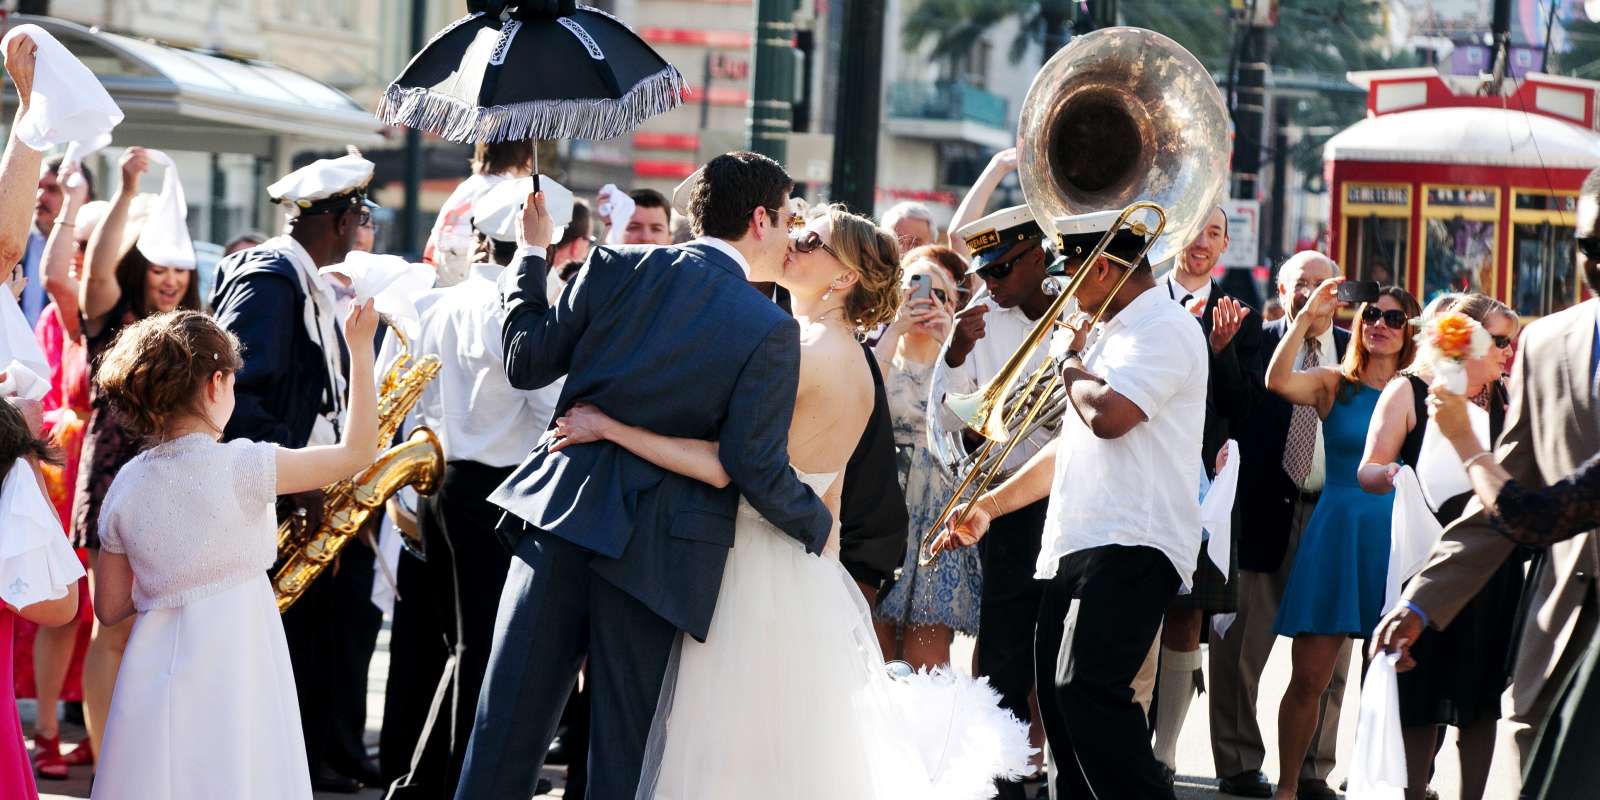 French Quarter bride and groom